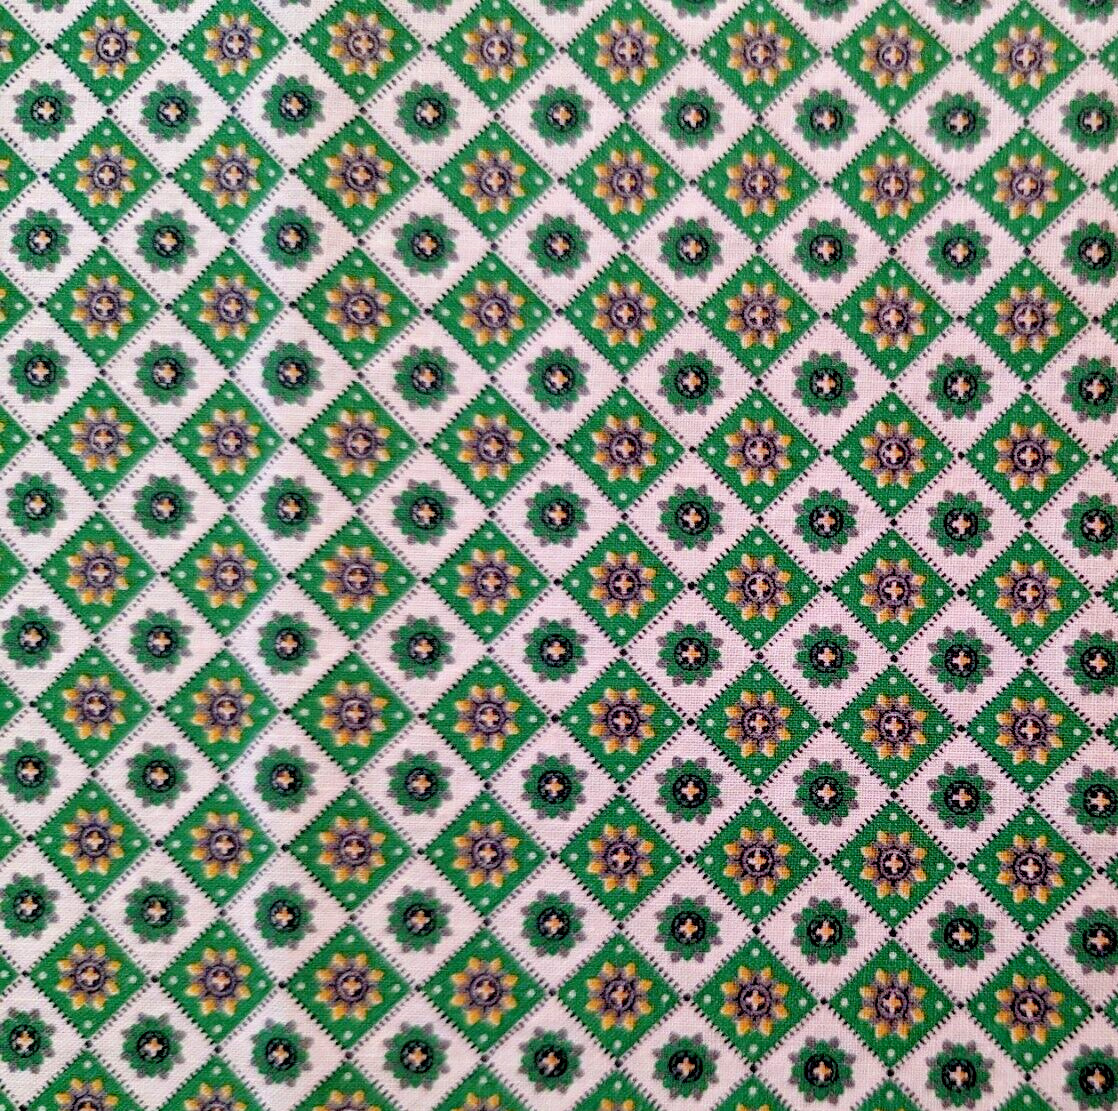 Vintage Green White Cotton Fabric Small Floral Diamond Pattern 1930's